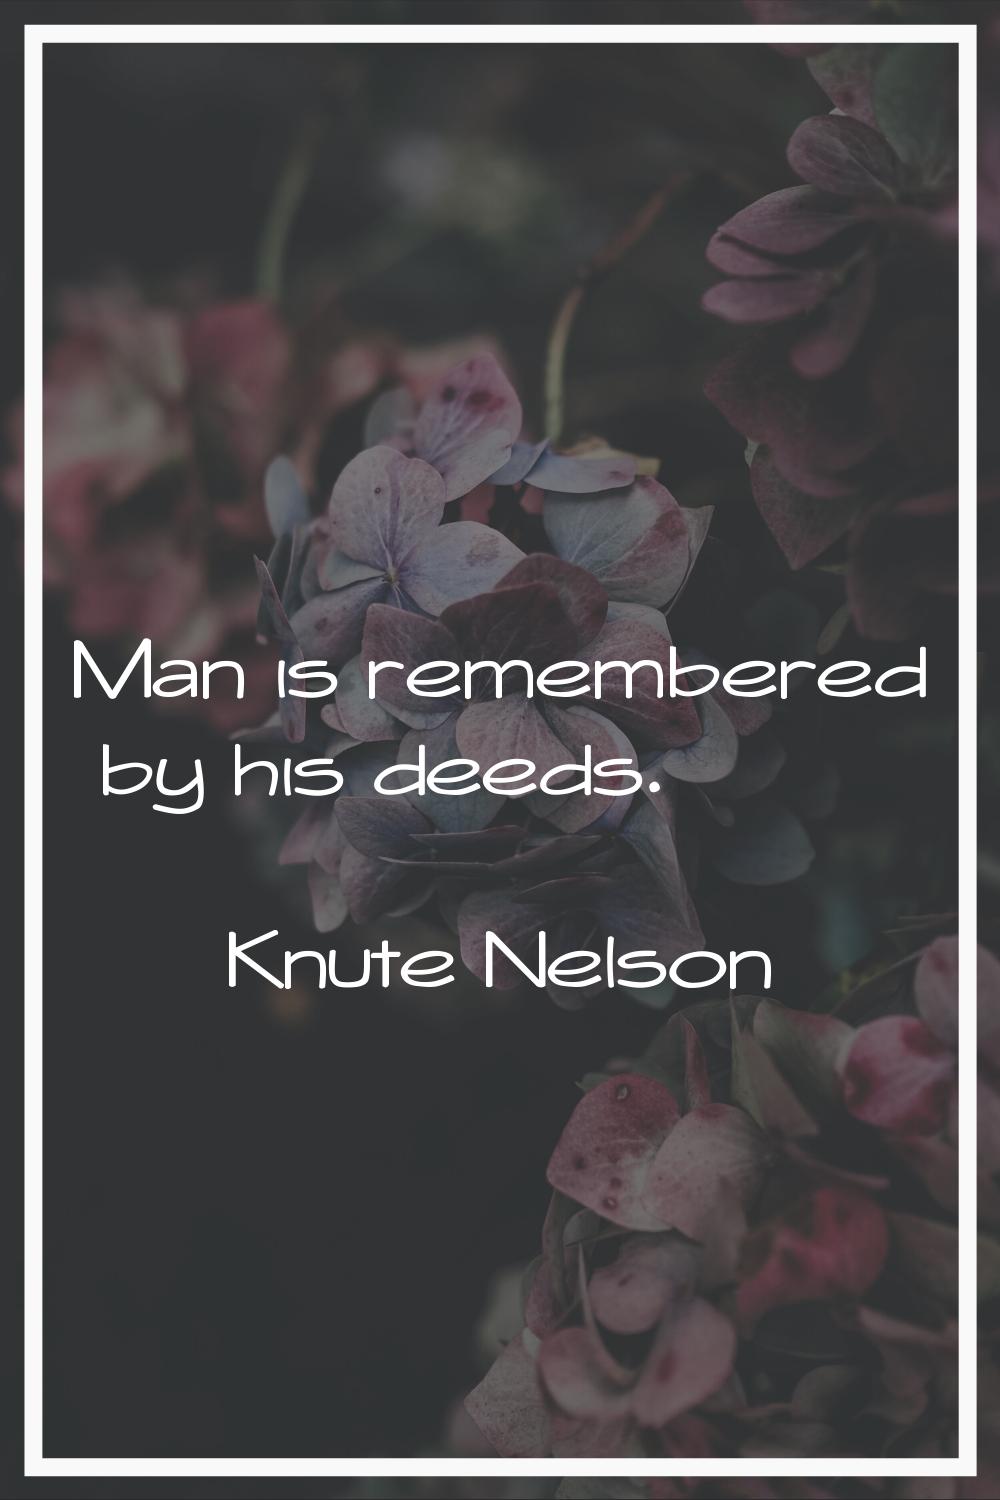 Man is remembered by his deeds.